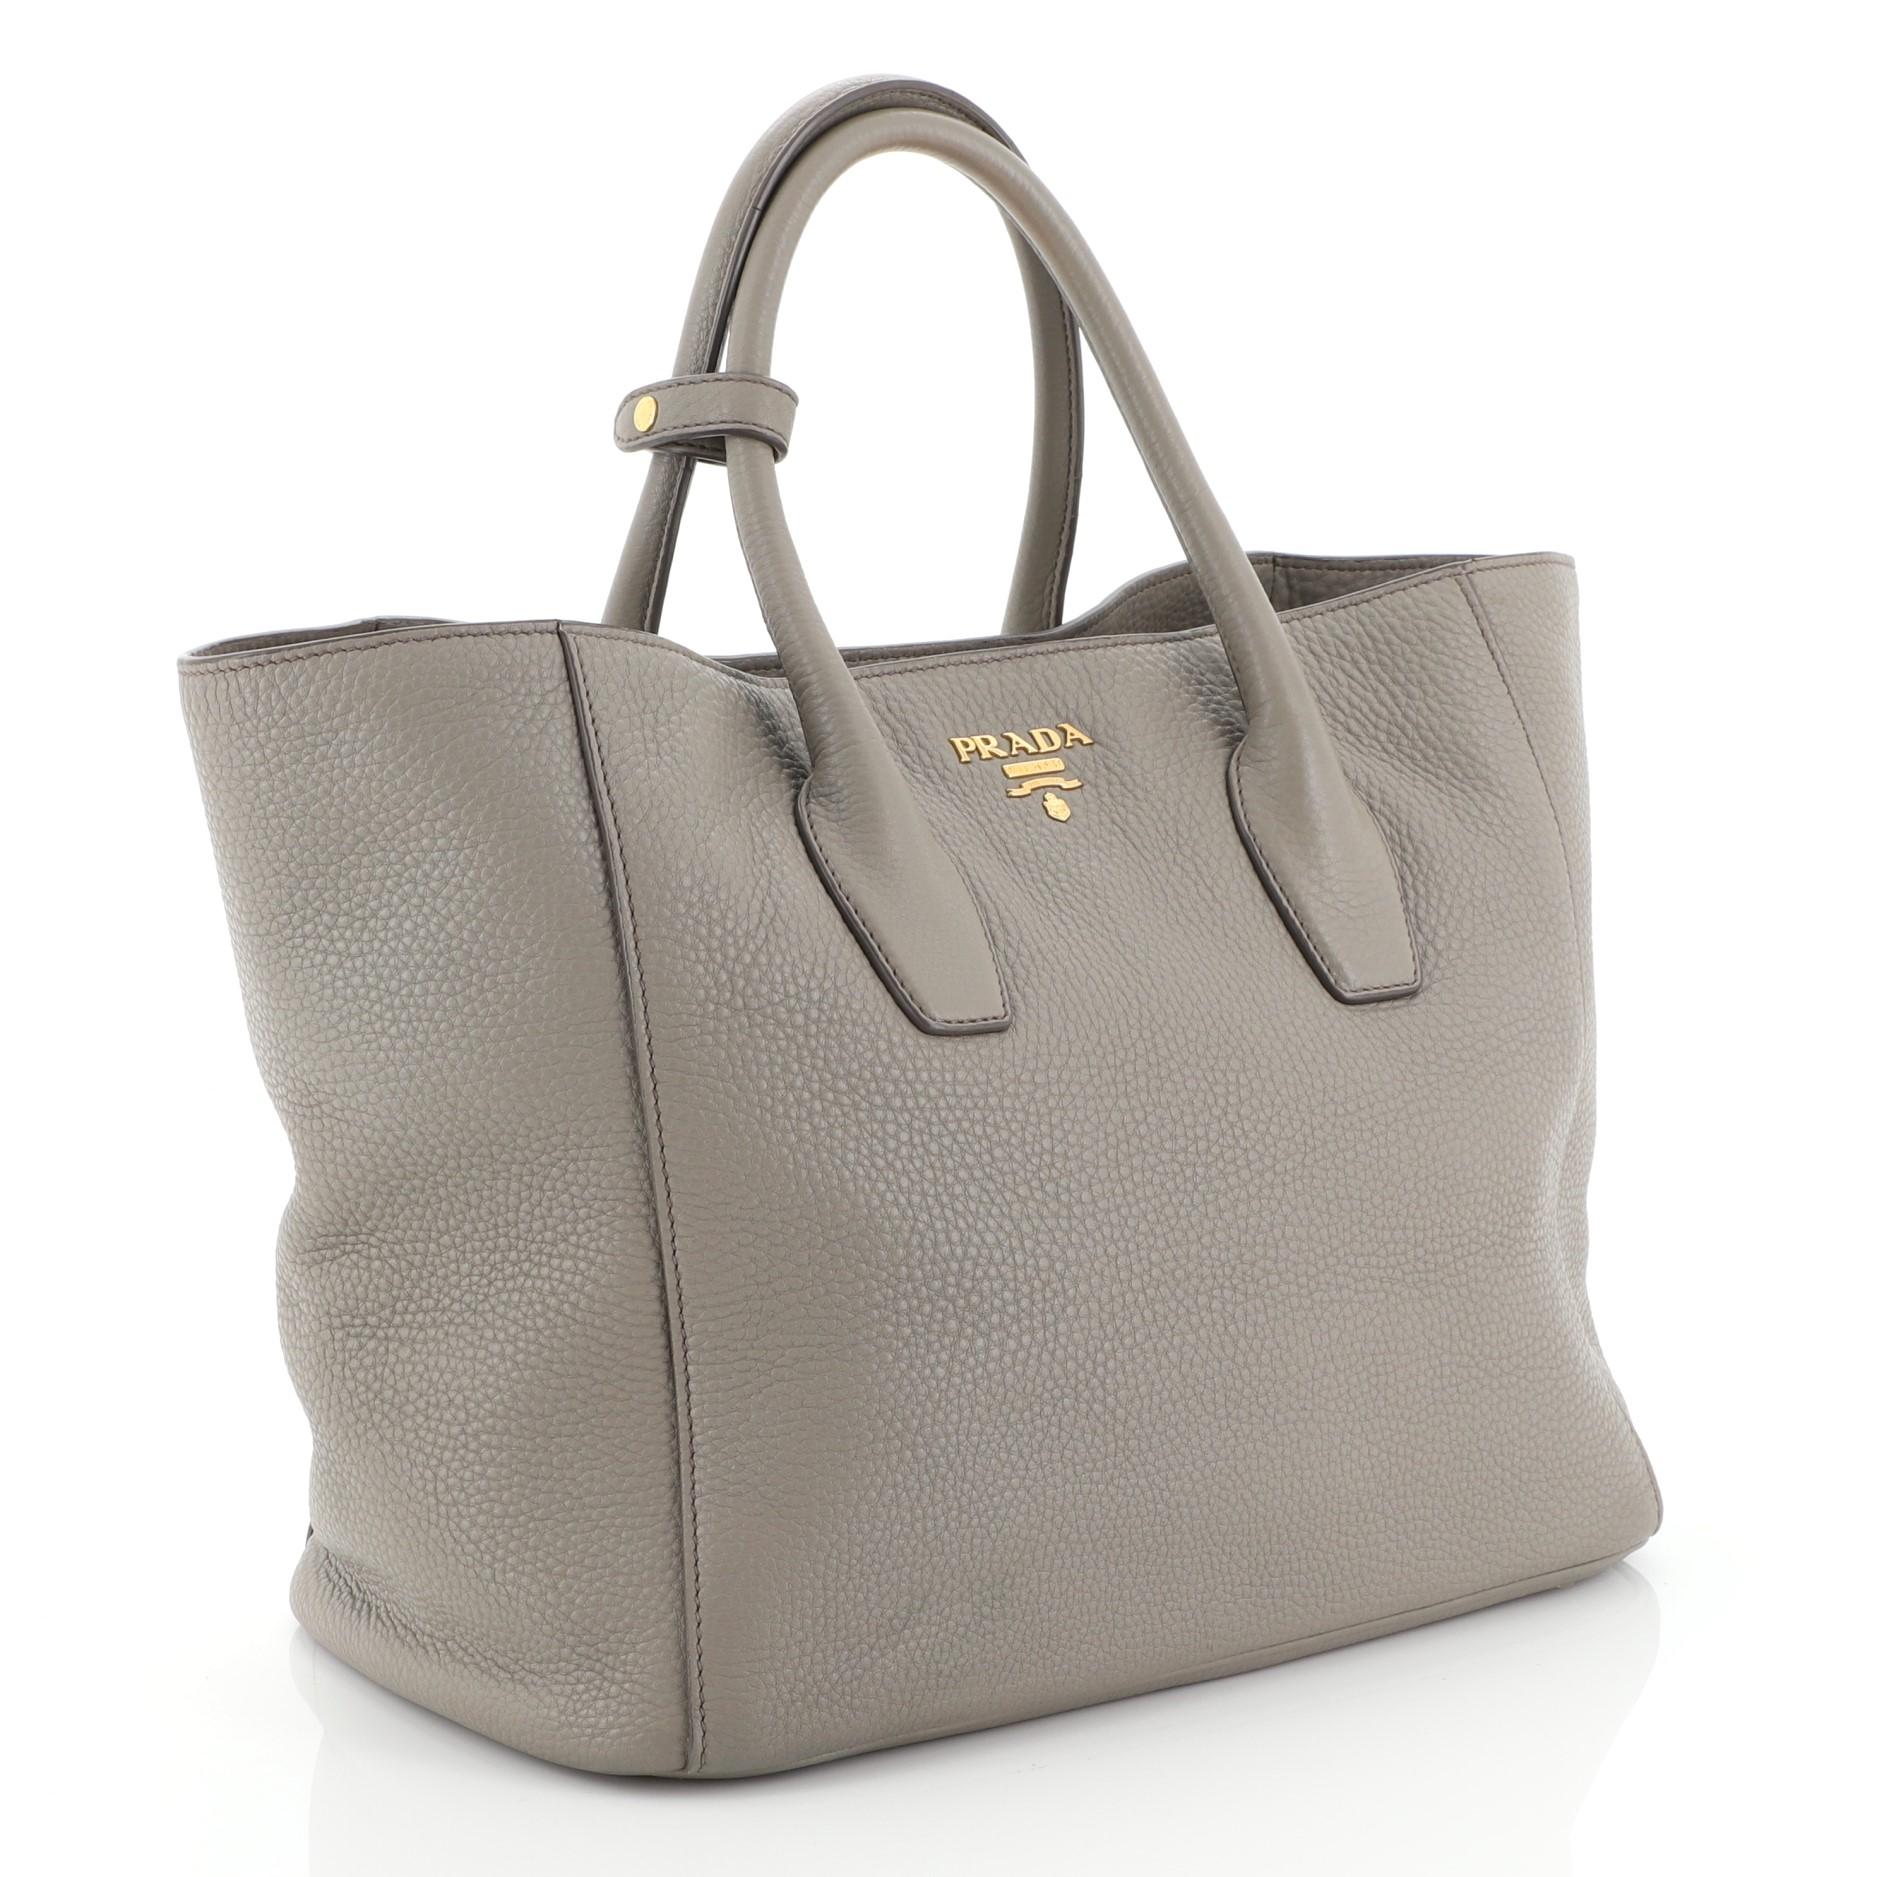 This Prada Twin Shopping Tote Vitello Daino Medium, crafted from neutral vitello daino leather, features dual-rolled handles, side snaps that reveals expanded wings, raised Prada logo, and gold-tone hardware. Its top magnetic snap closure opens to a